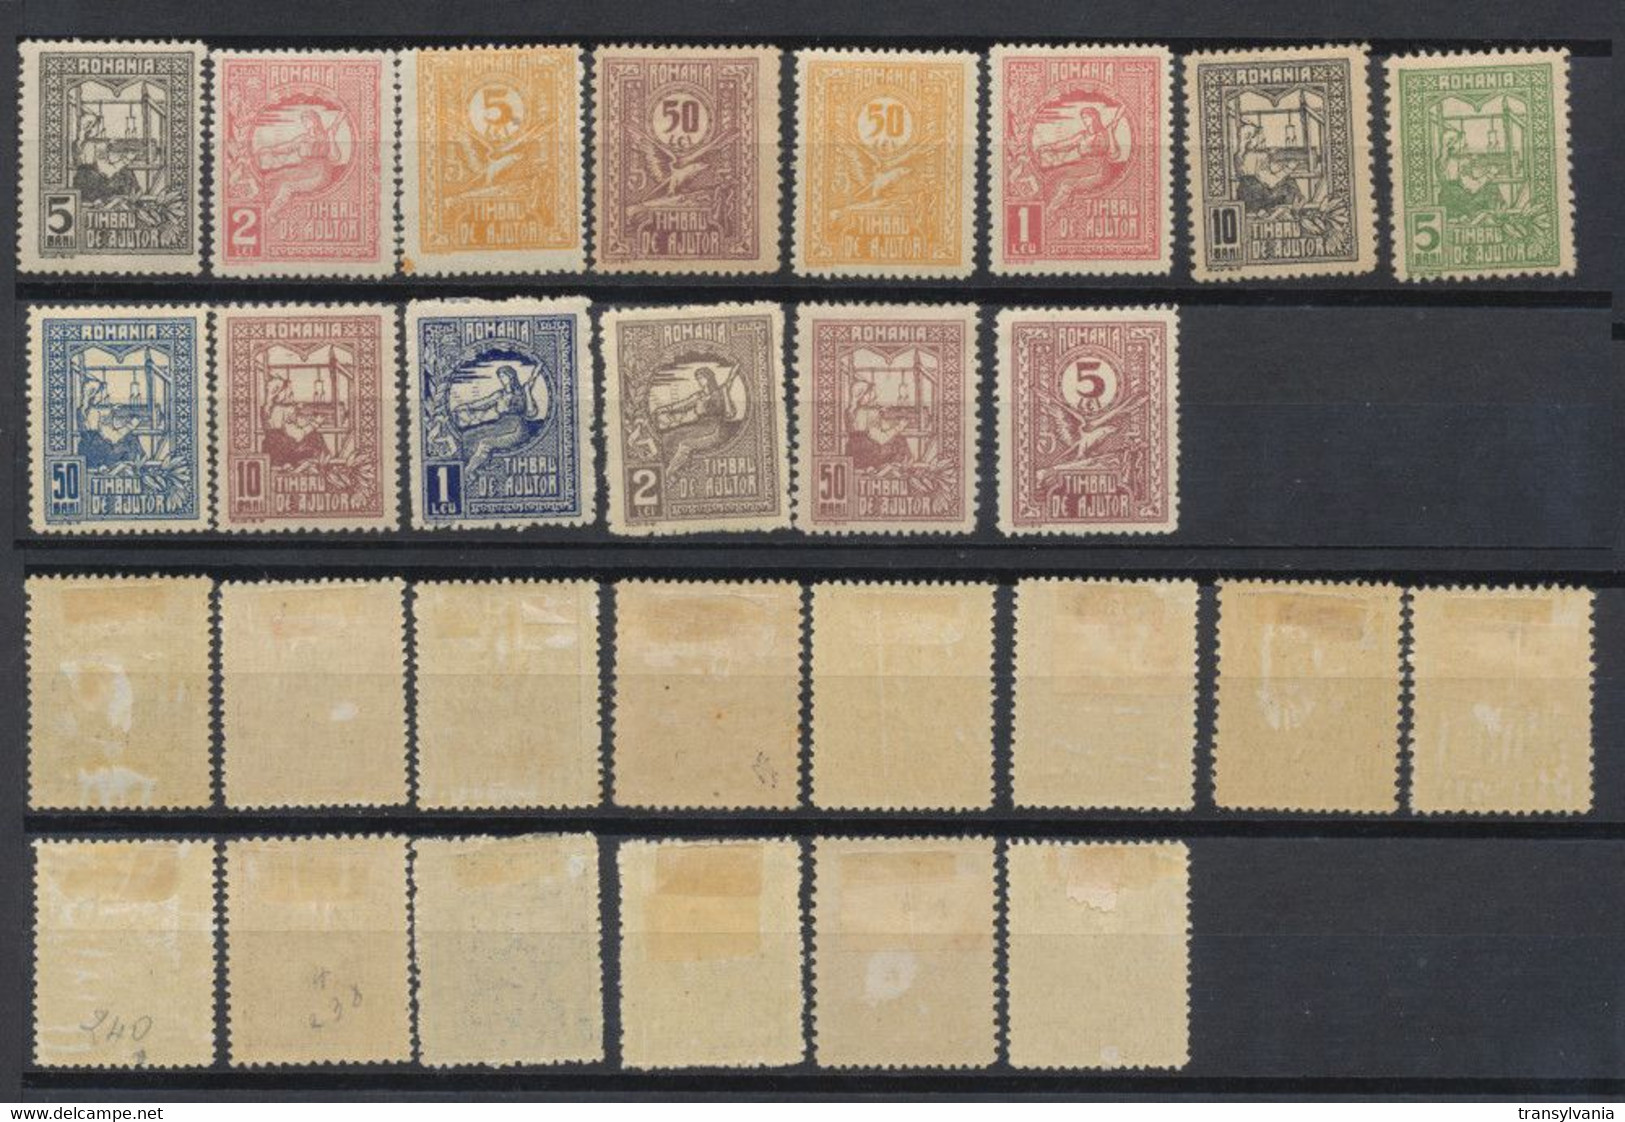 Romania 1916-1918 Rare Set Of 14 Relief Aid Stamps MLH, Only 200 Complete Sets Issued - Variedades Y Curiosidades